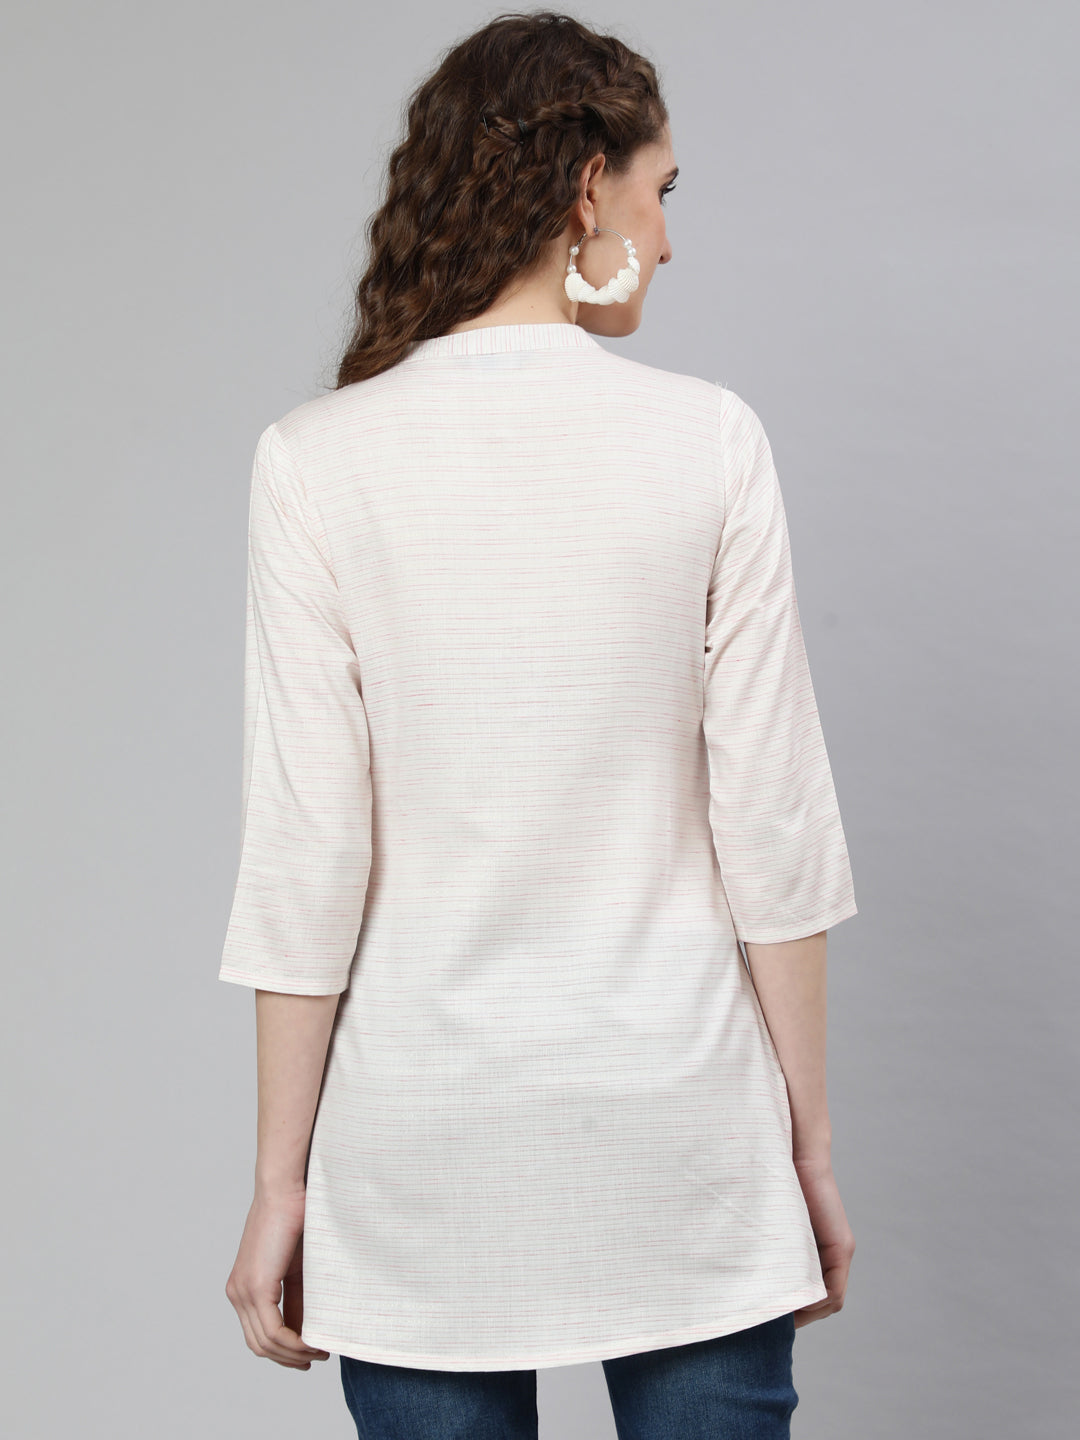 Women's Off-White and Pink Printed Straight Tunic With Three Quarter Sleeves - Nayo Clothing